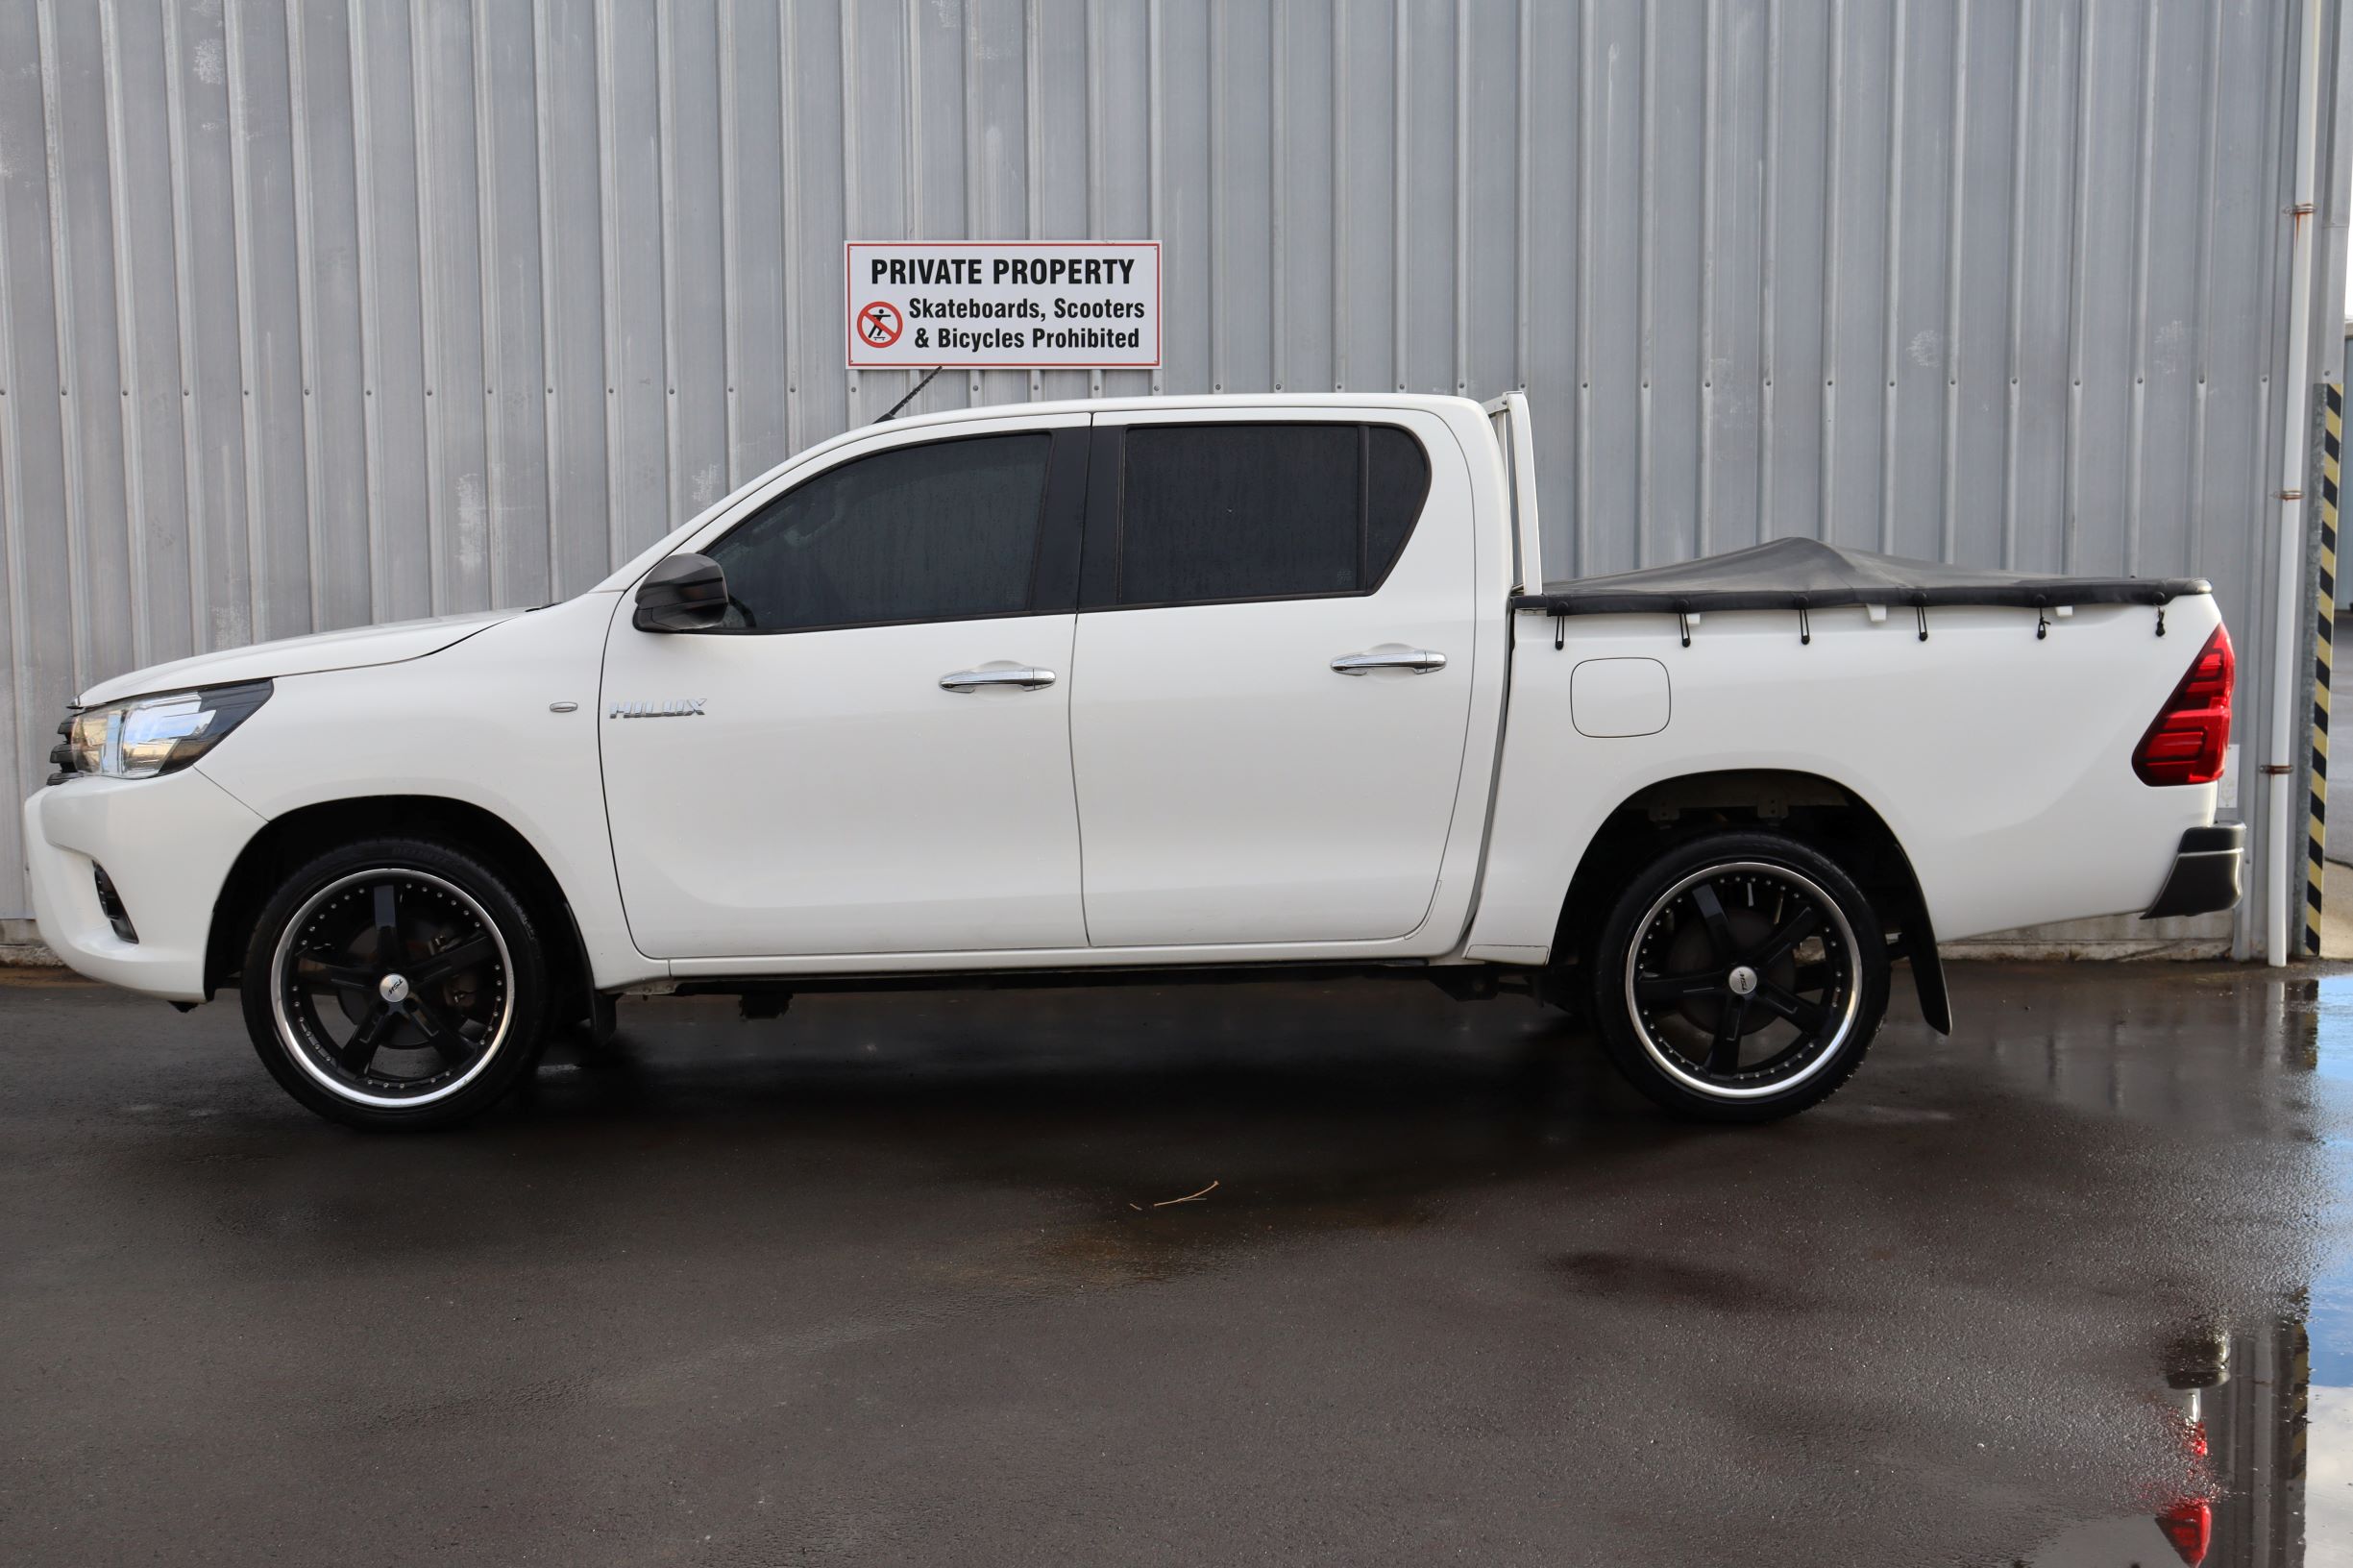 Toyota Hilux 2wd double cab 2016 for sale in Auckland